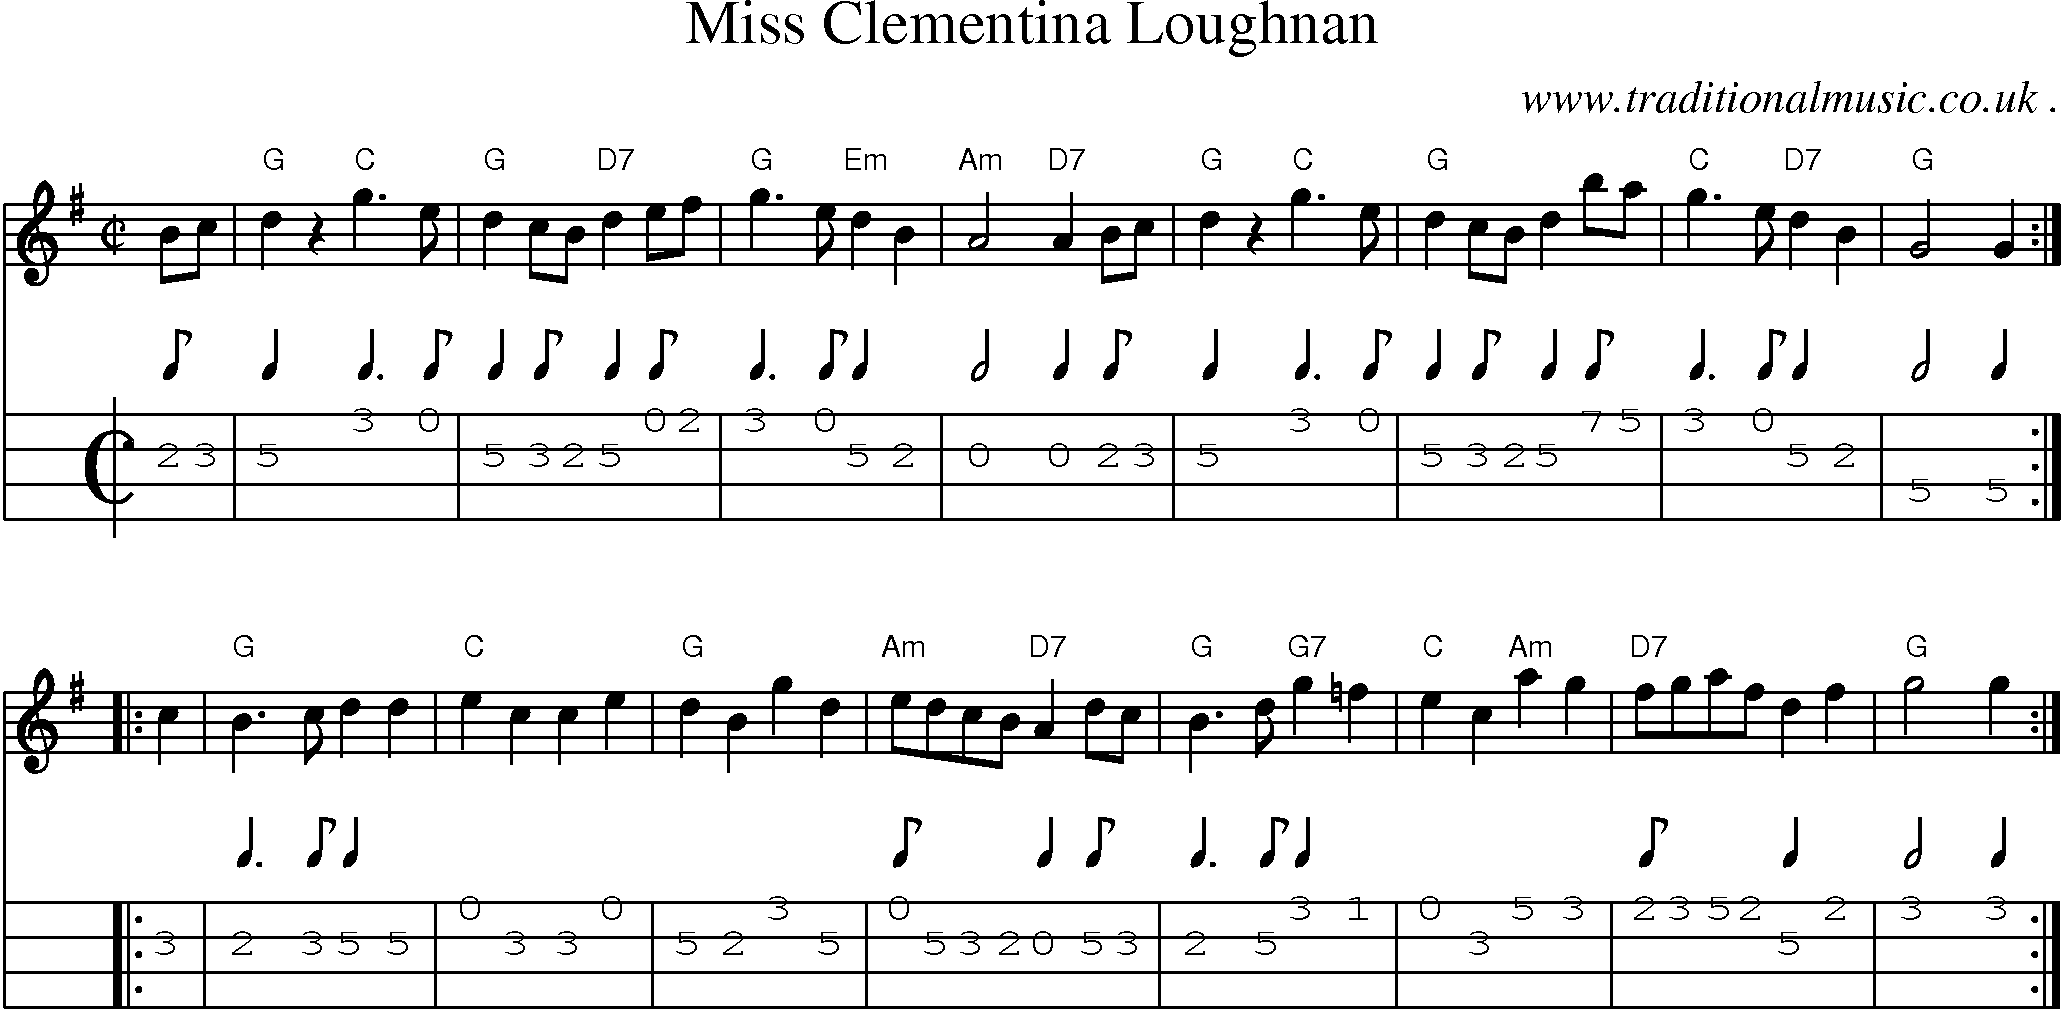 Sheet-music  score, Chords and Mandolin Tabs for Miss Clementina Loughnan